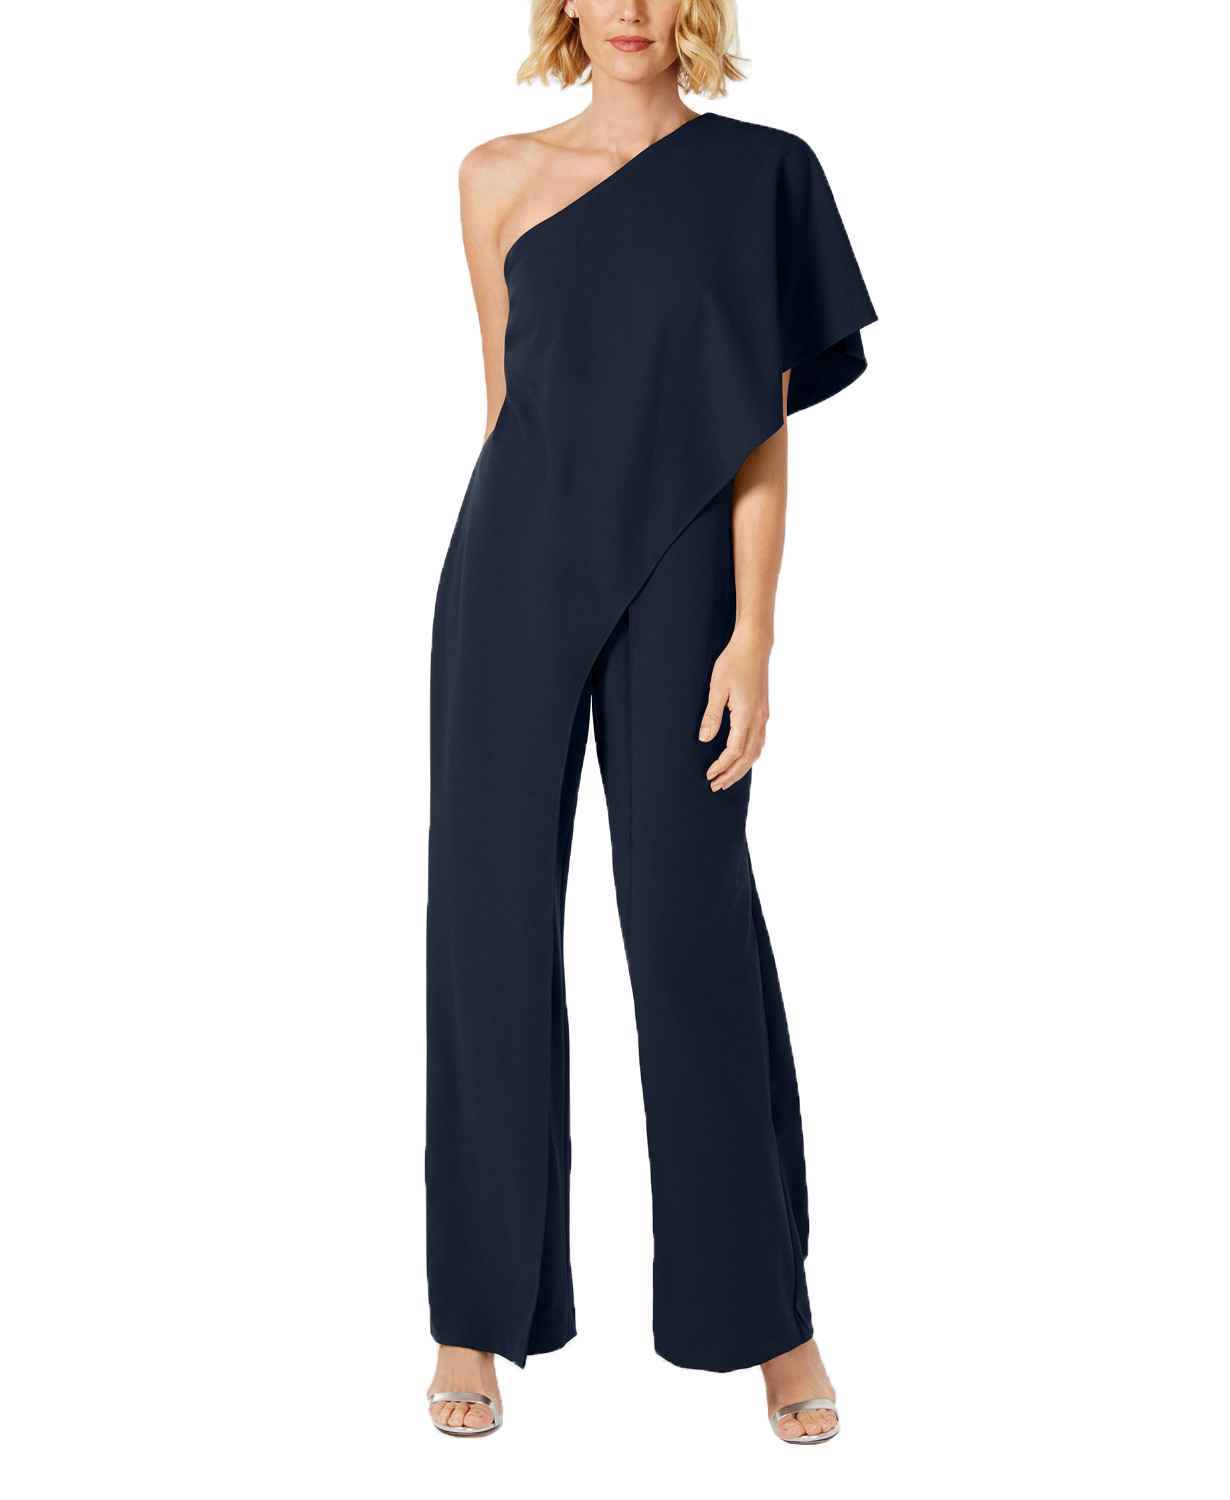 woocommerce-673321-2209615.cloudwaysapps.com-adrianna-papell-womens-blue-one-shoulder-jumpsuit